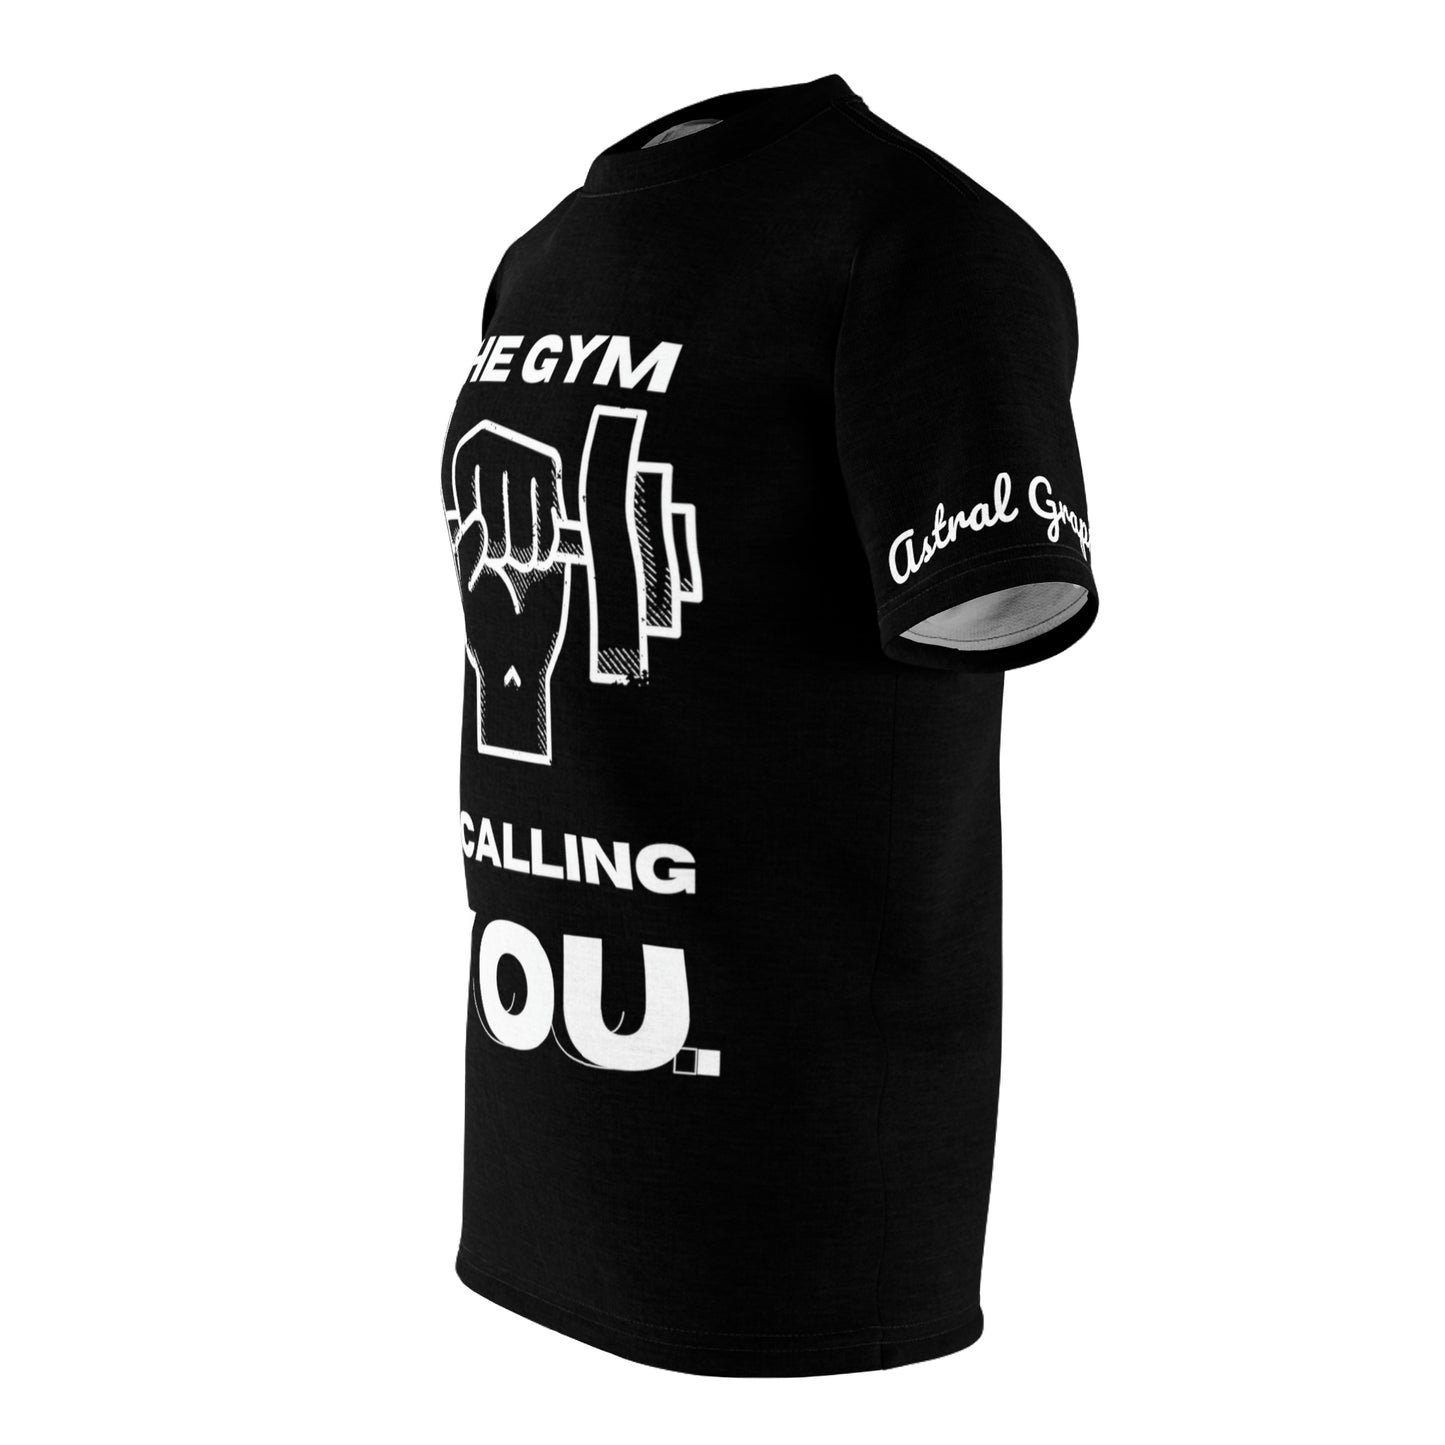 Word Art Collection - Unisex AOP Cut & Sew Tee - The Gym v1 in Black